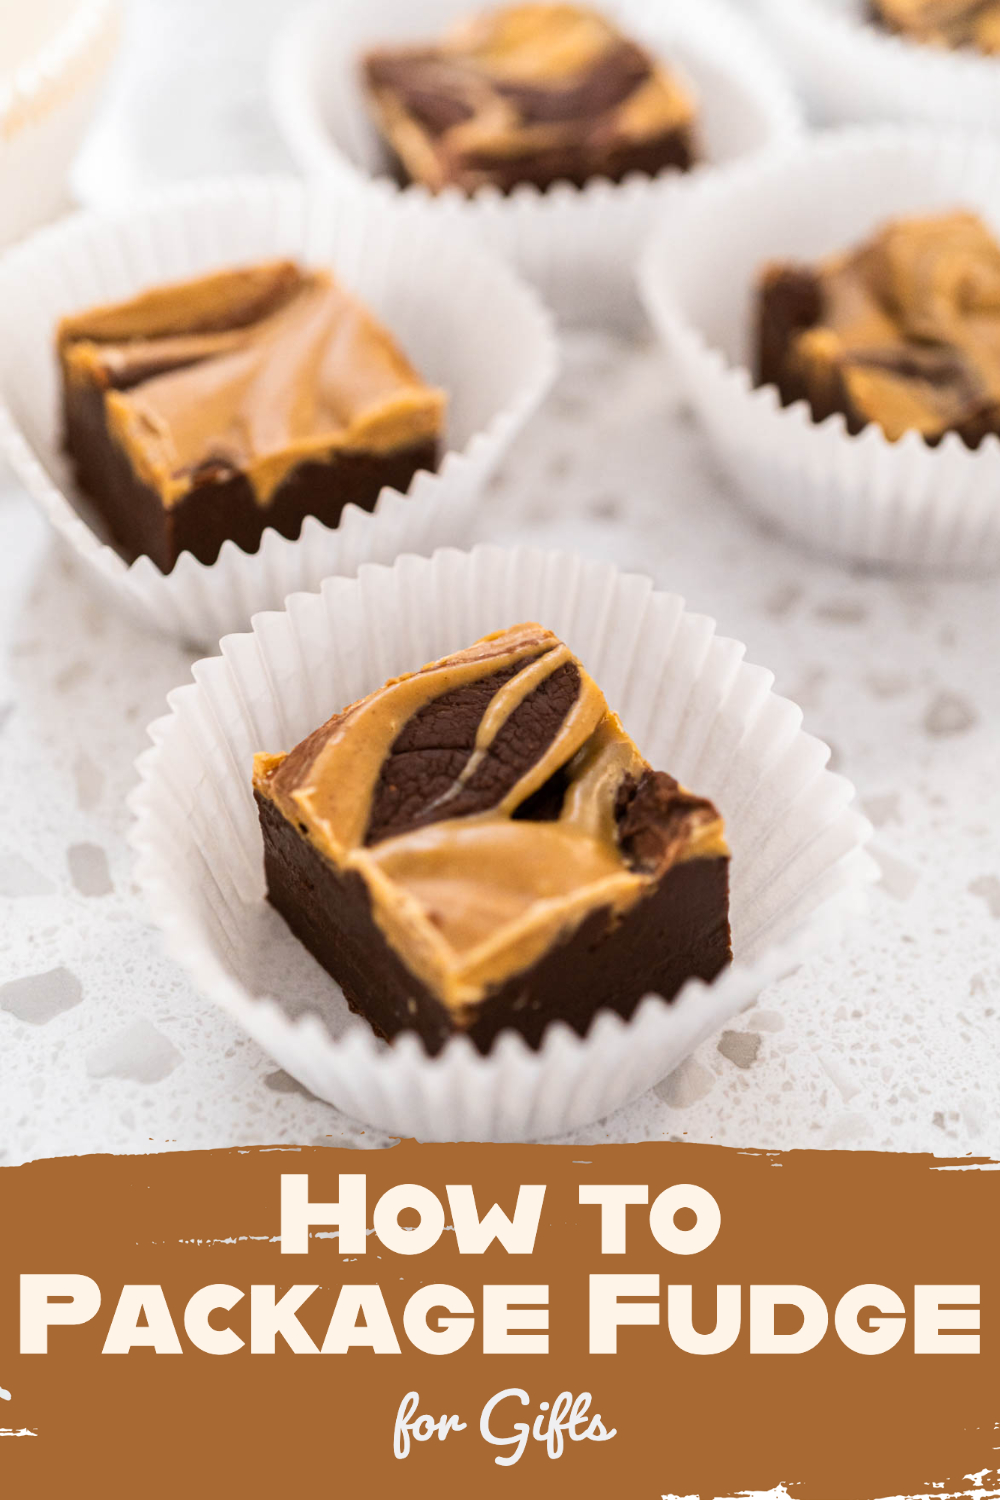 How to Package Fudge for Gifts